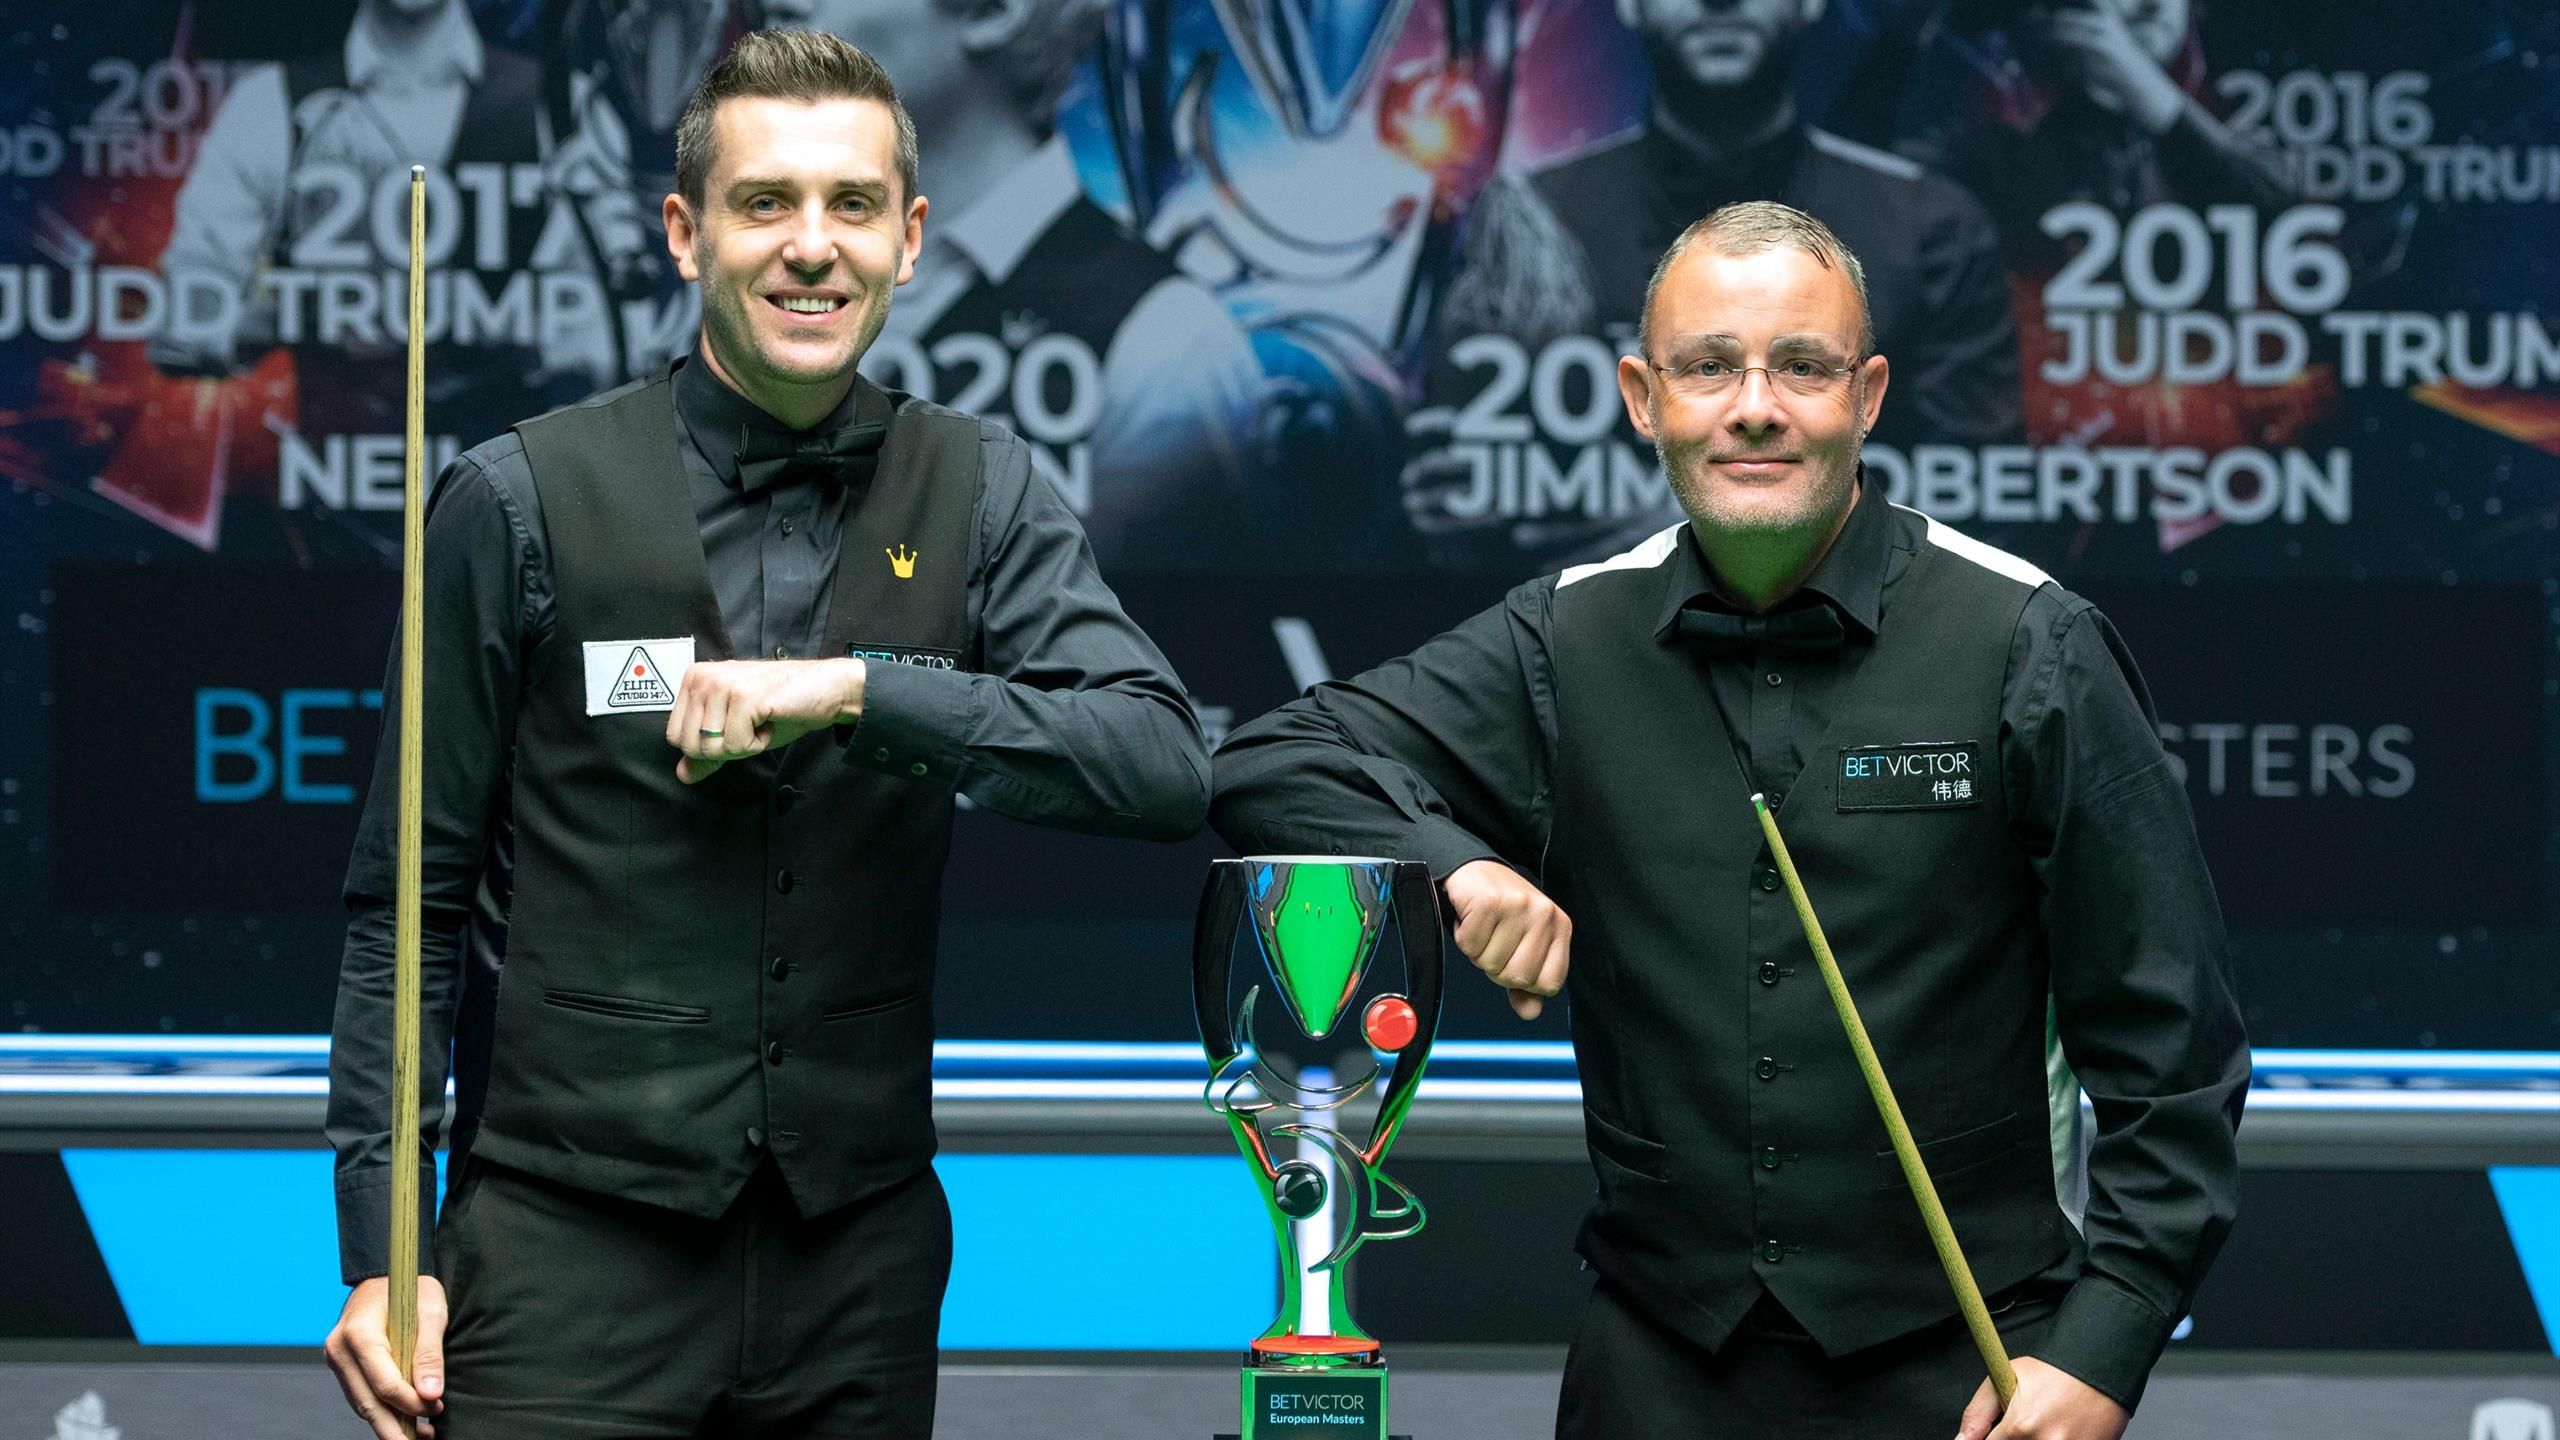 European Masters snooker A tournament spanning 34 years, nine countries, 17 champions, Ronnie OSullivan, Jimmy White